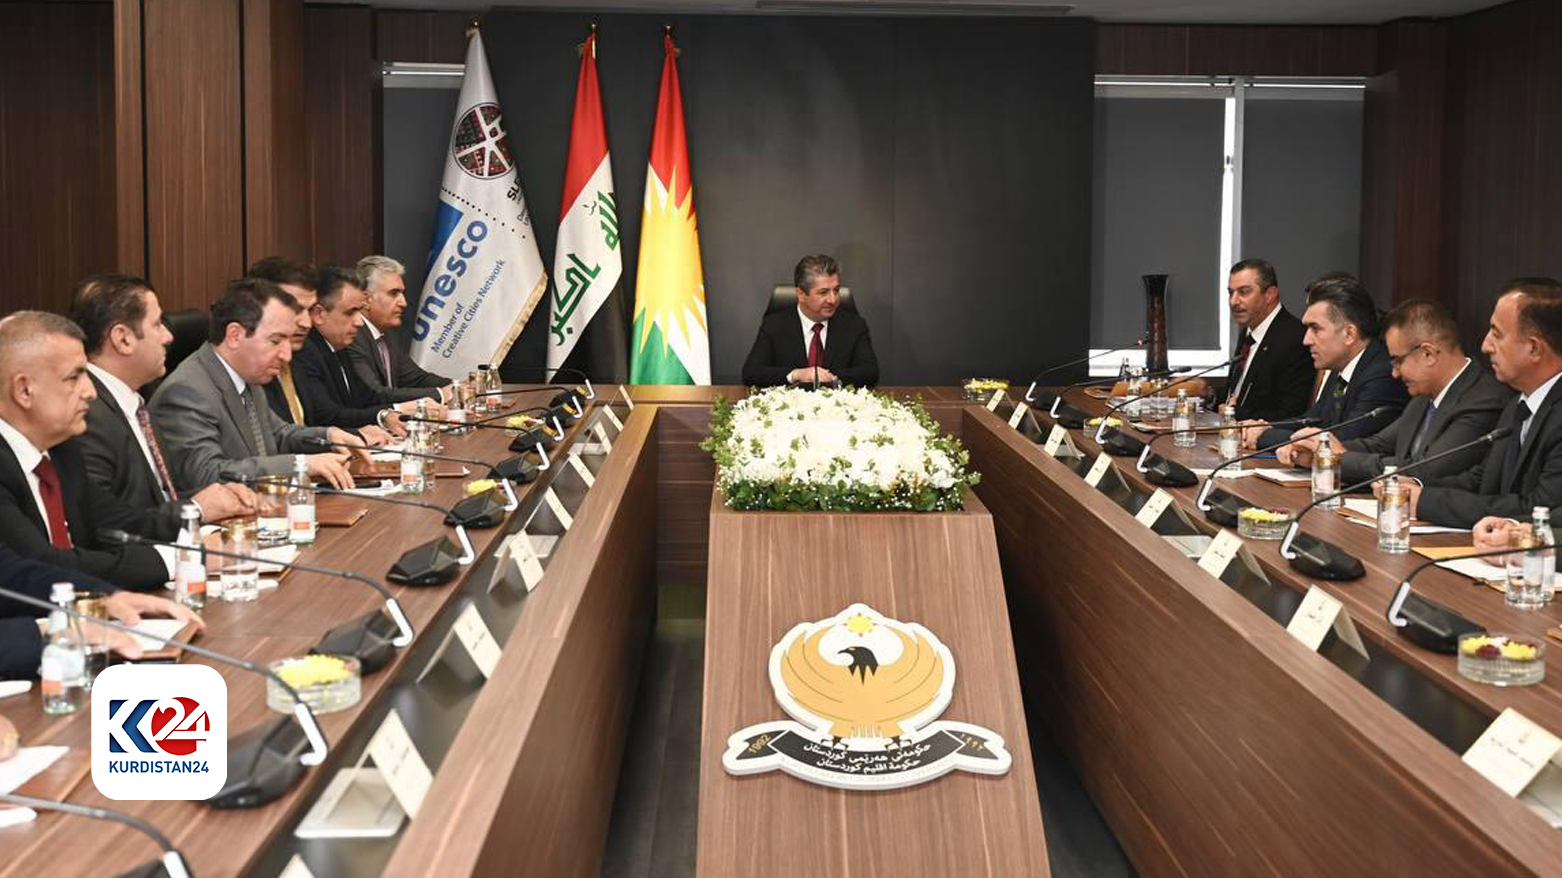 PHOTOS PM Barzani convened with administrative officials of Sulaimani province